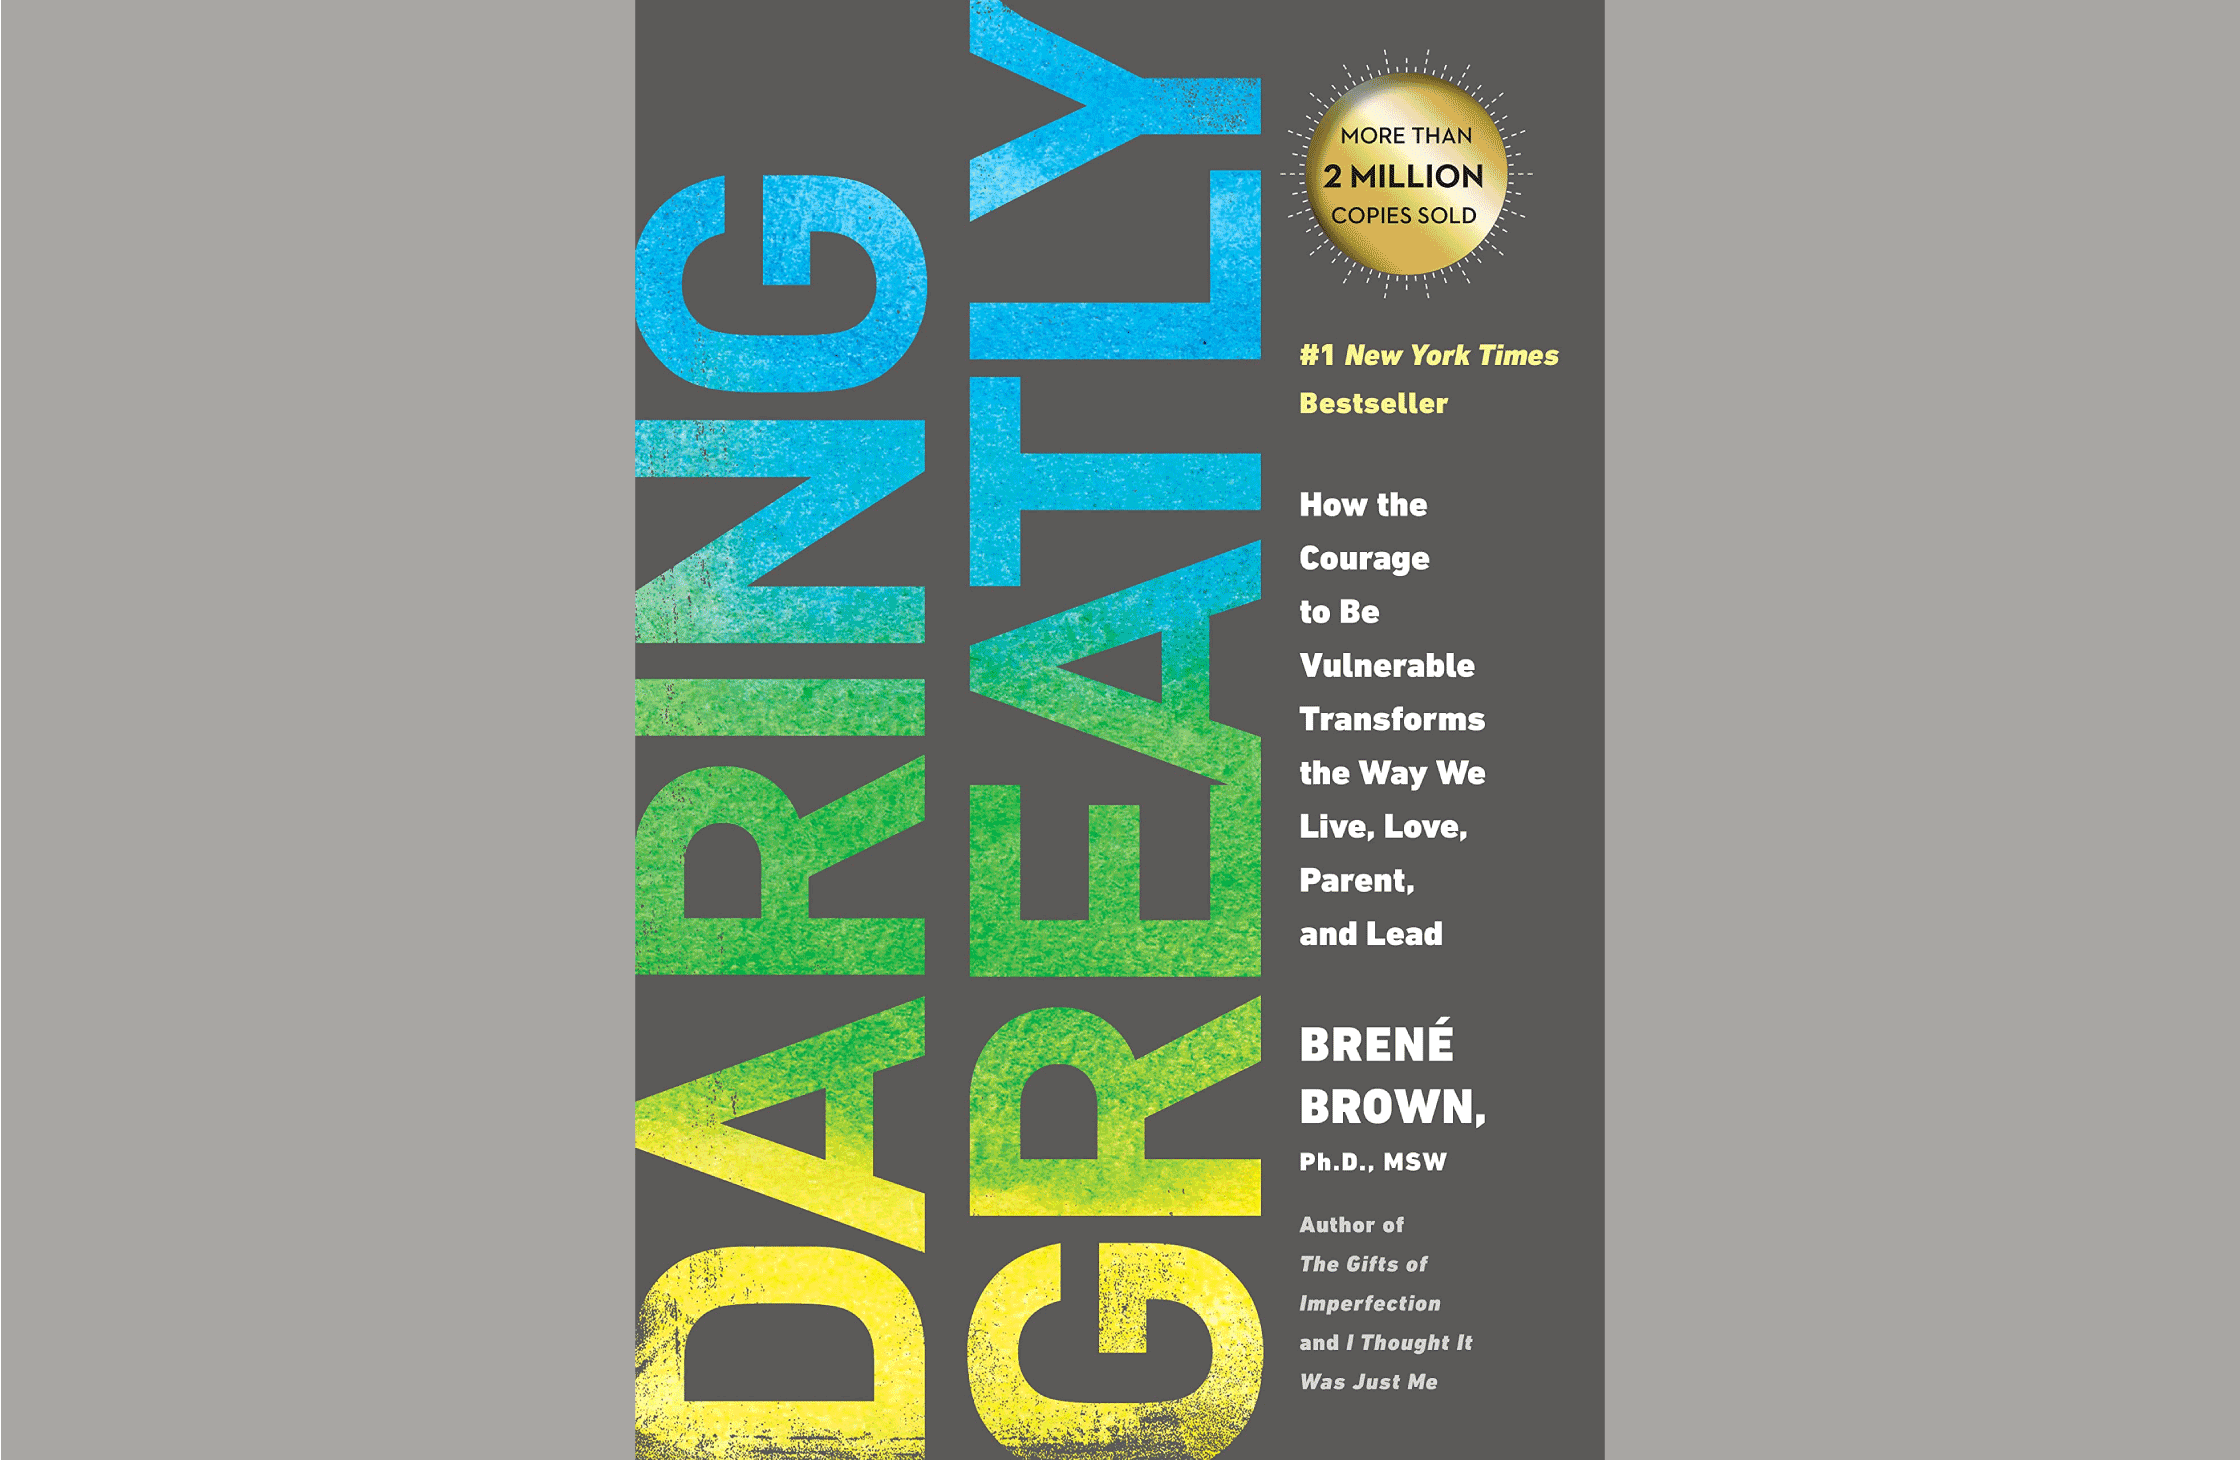 Summary: Daring Greatly: How the Courage to Be Vulnerable Transforms the Way We Live, Love, Parent, and Lead: Brené Brown